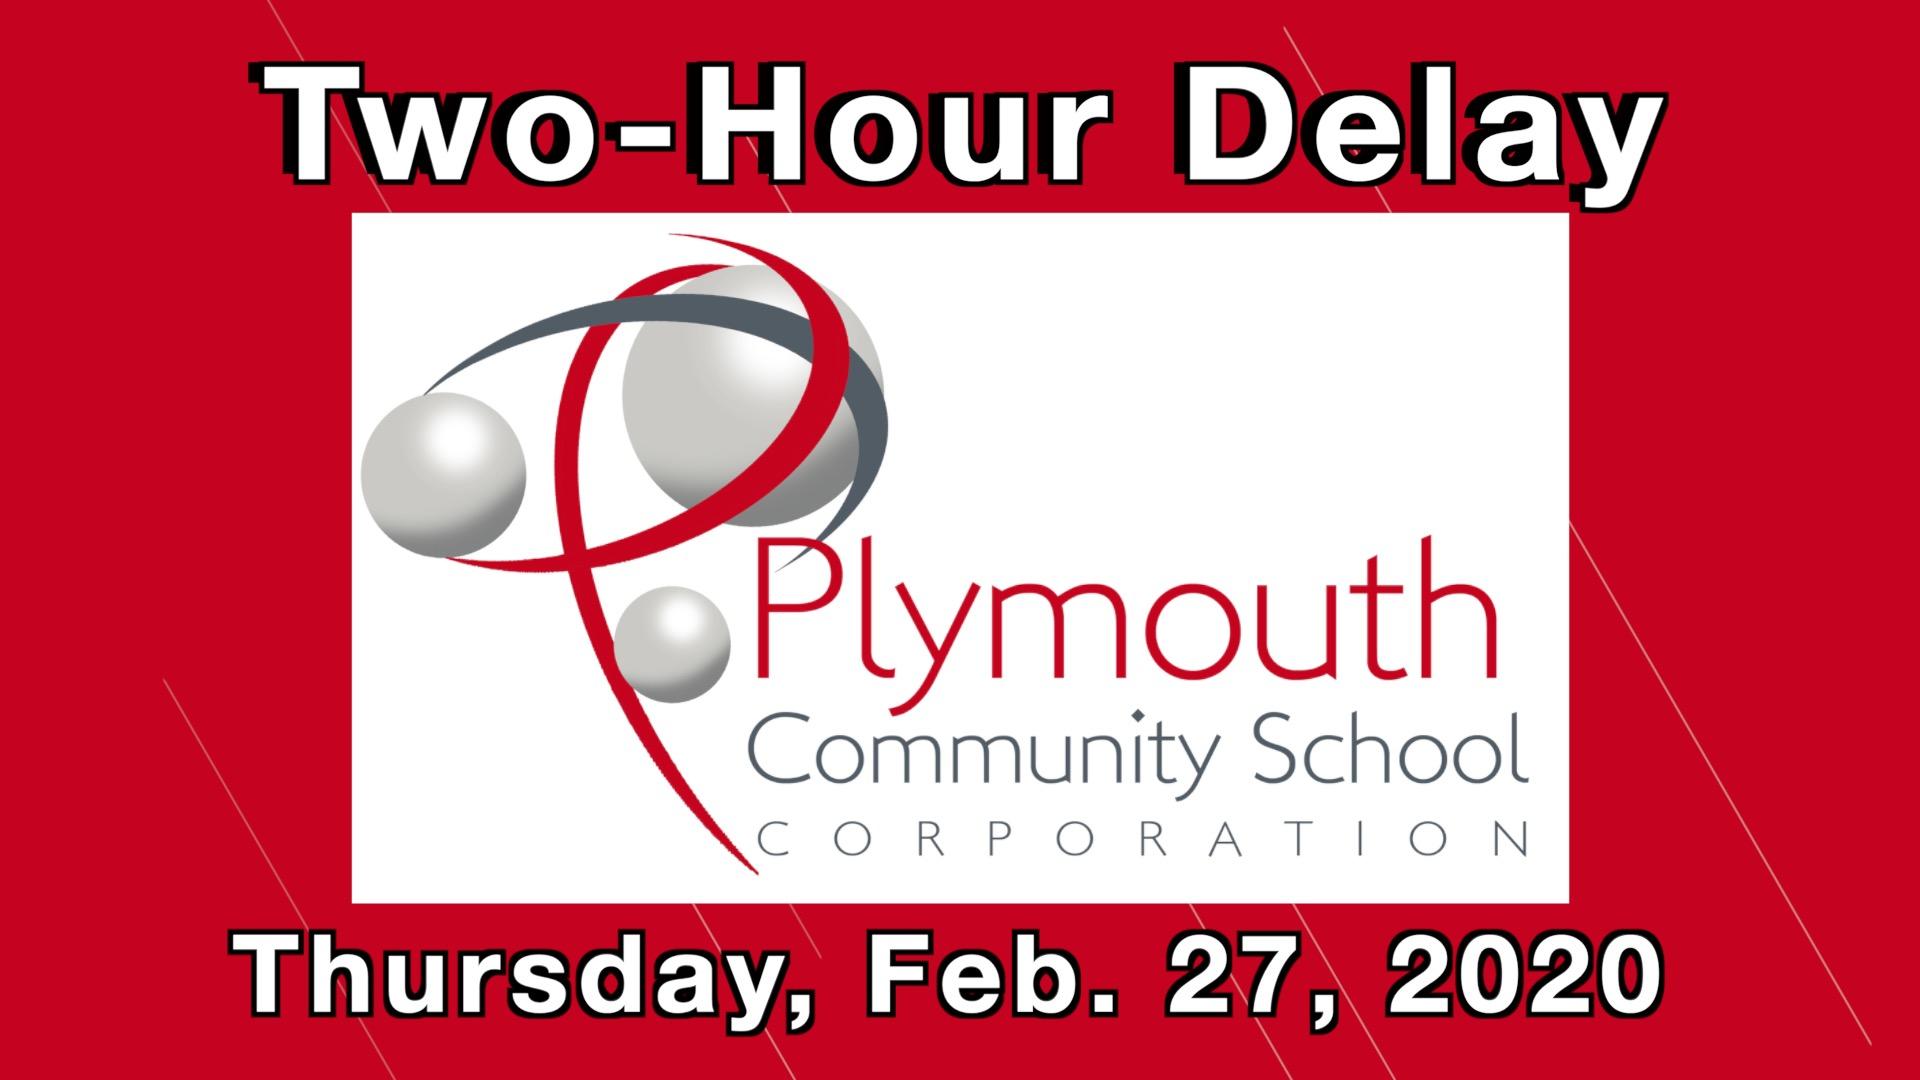 Two-Hour Delay Thursday, February 27, 2020 on red background with PCSC logo